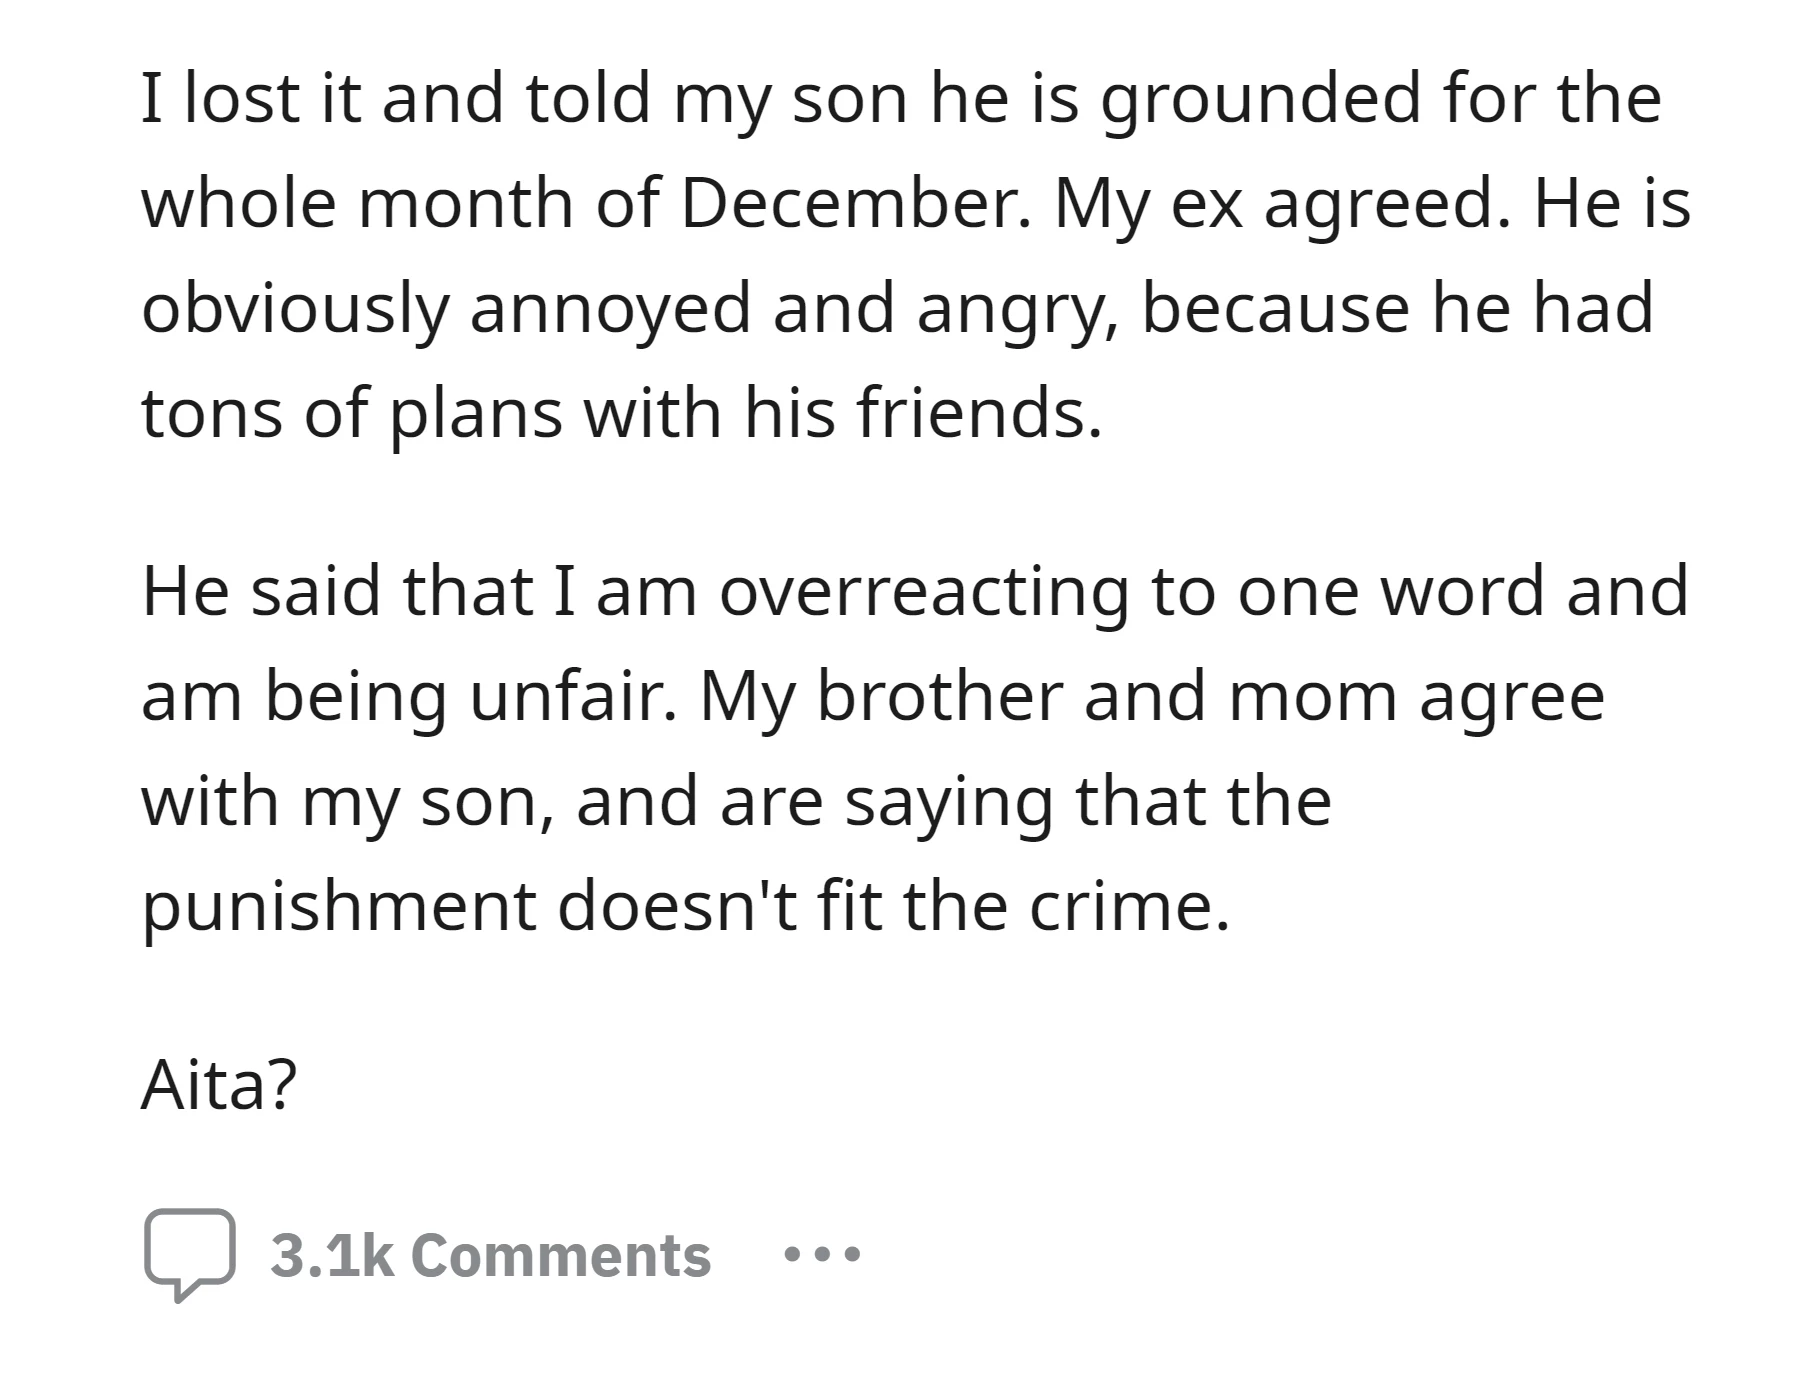 OP, angered by his son's use of a racial slur, grounded him for the entire month of December